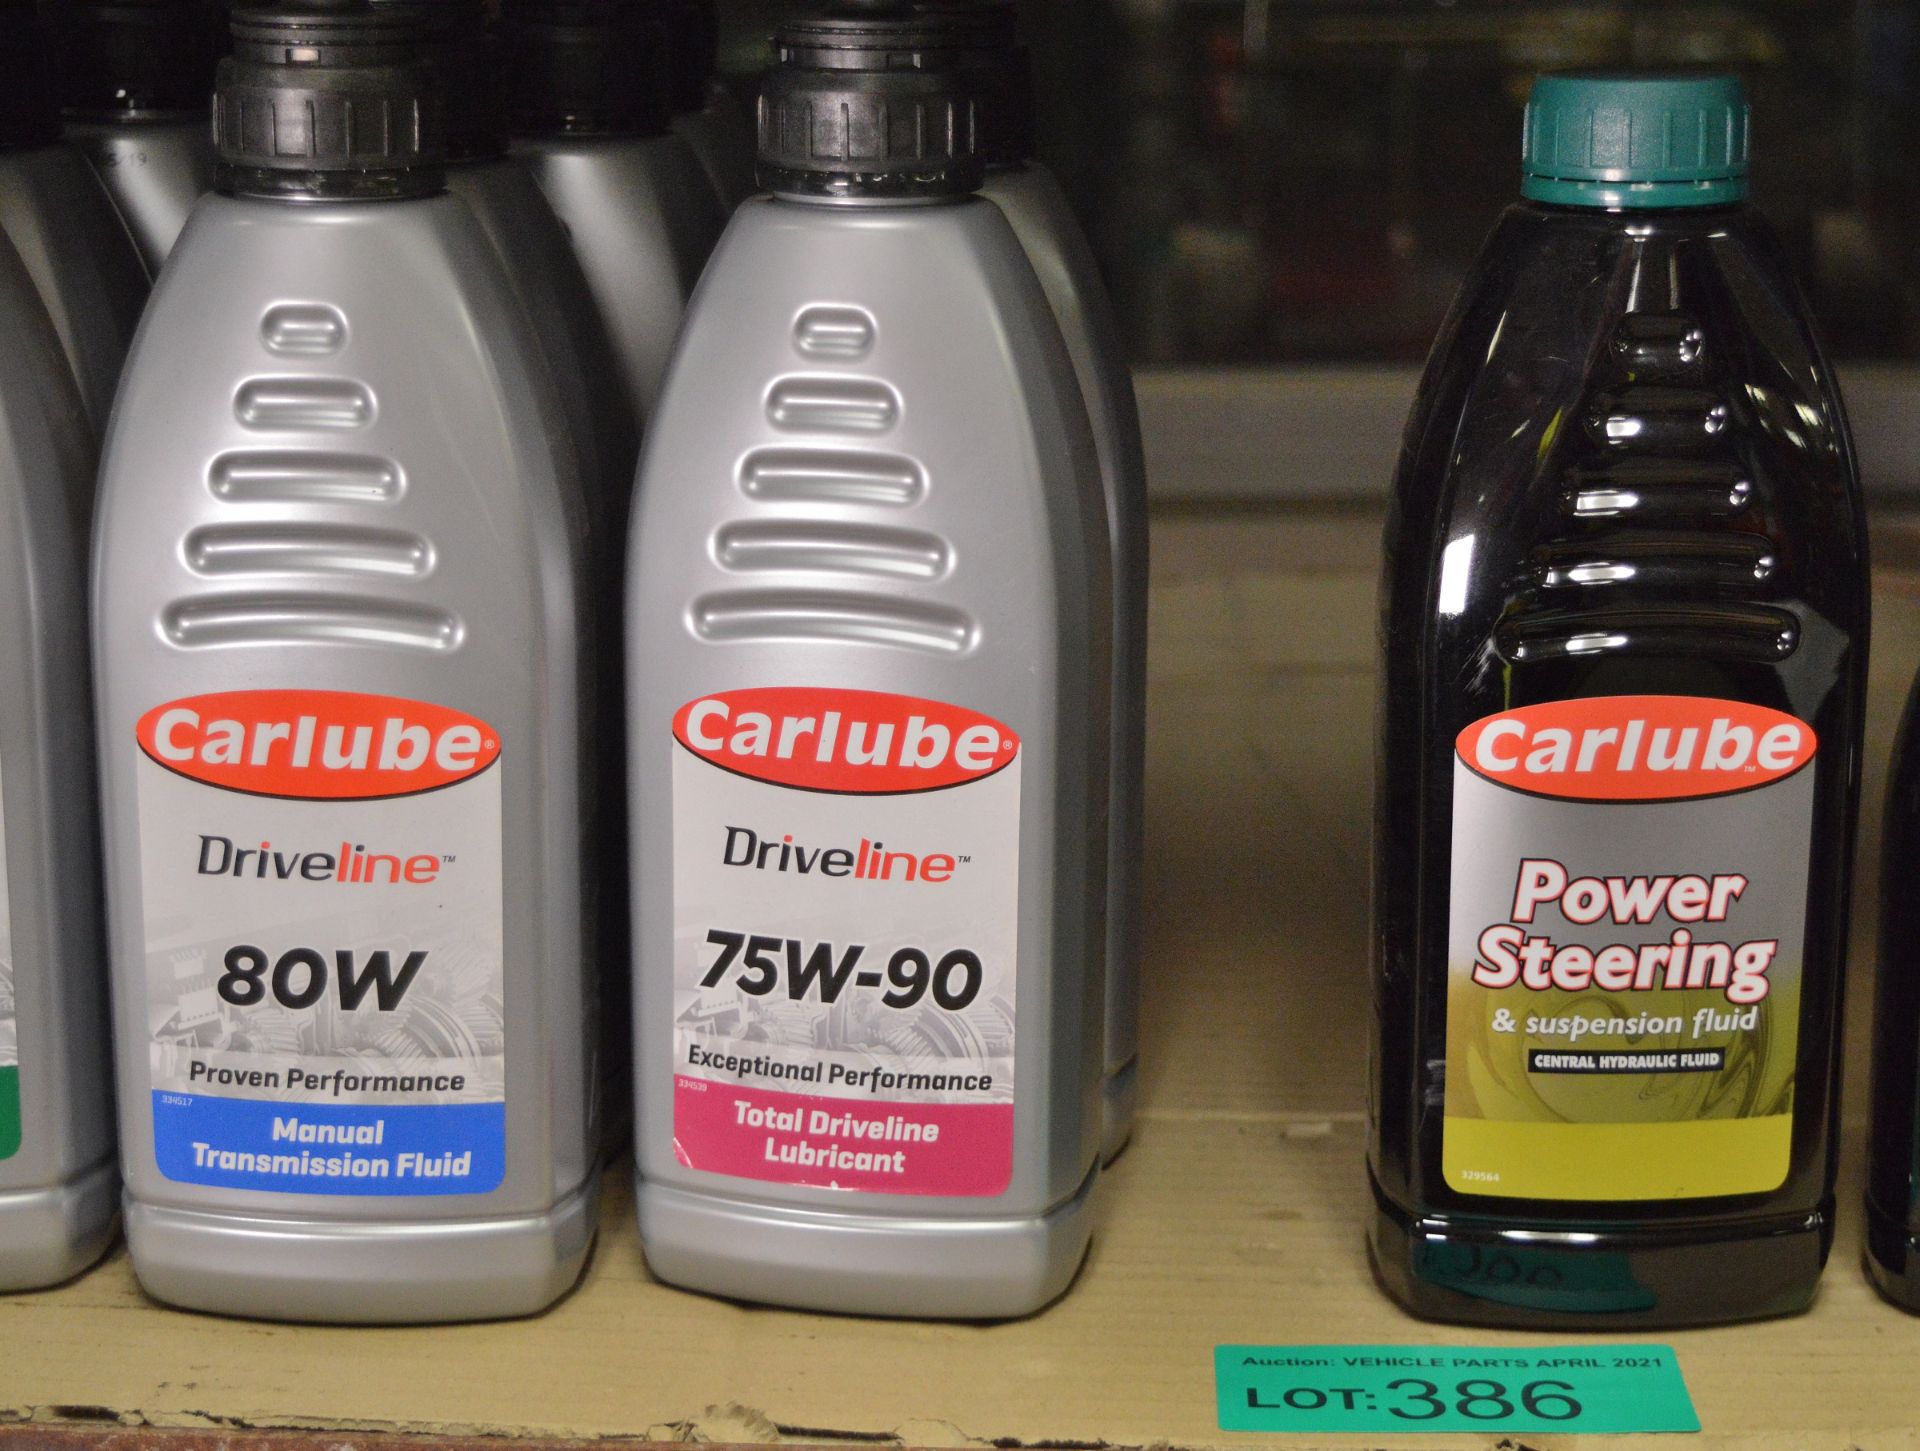 Carlube Manual Transmission Fluid, Axle Oil, Total Driveline Lubricant - 1 litre & more - Image 3 of 5